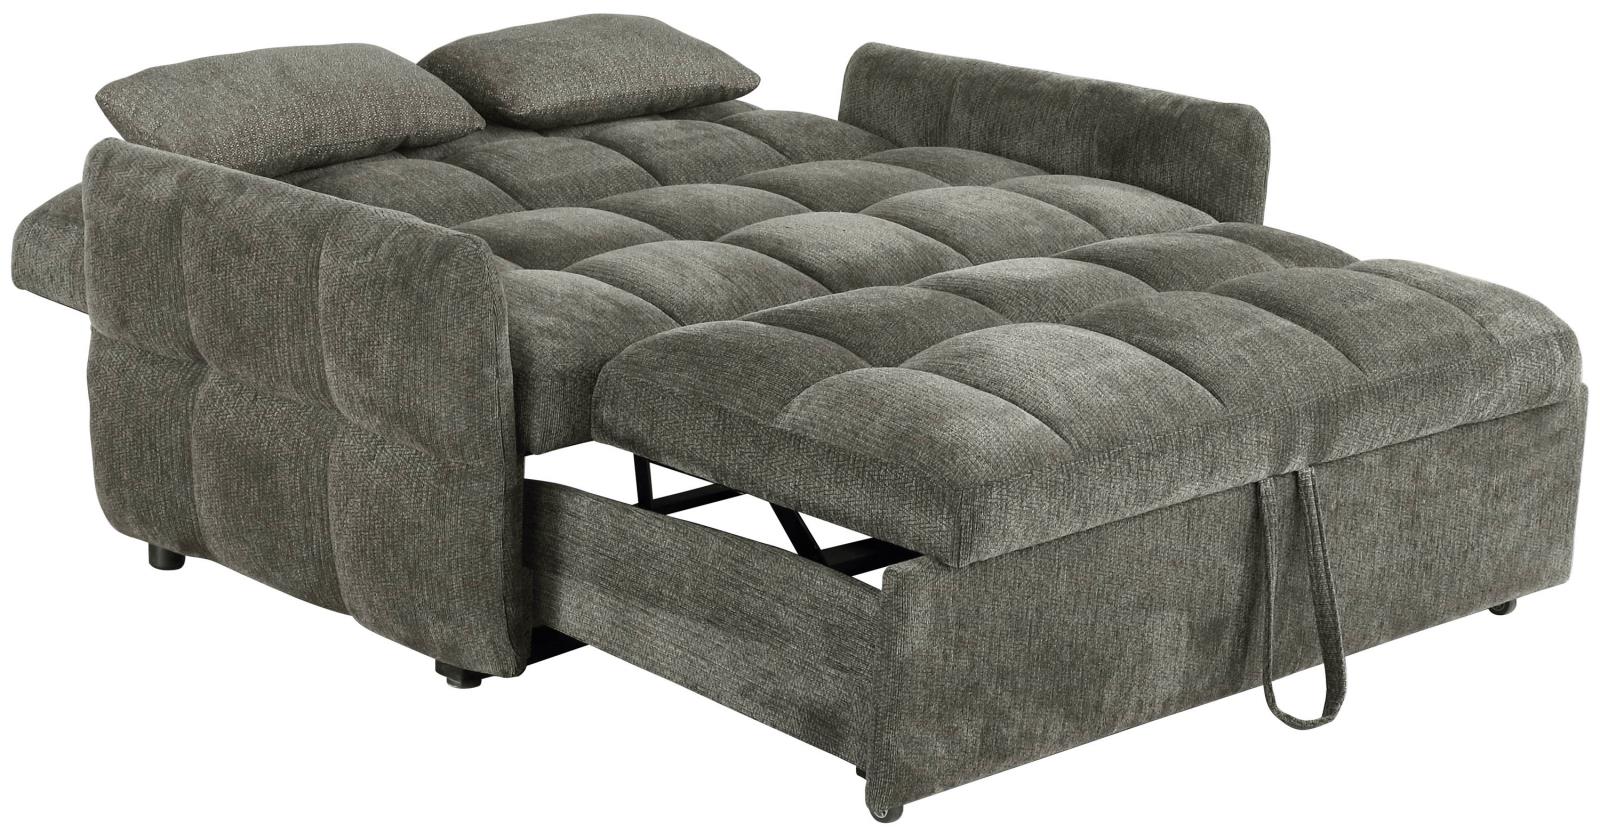 Cotswold Tufted Cushion Sleeper Sofa Bed Brown - 508308 - Bien Home Furniture &amp; Electronics